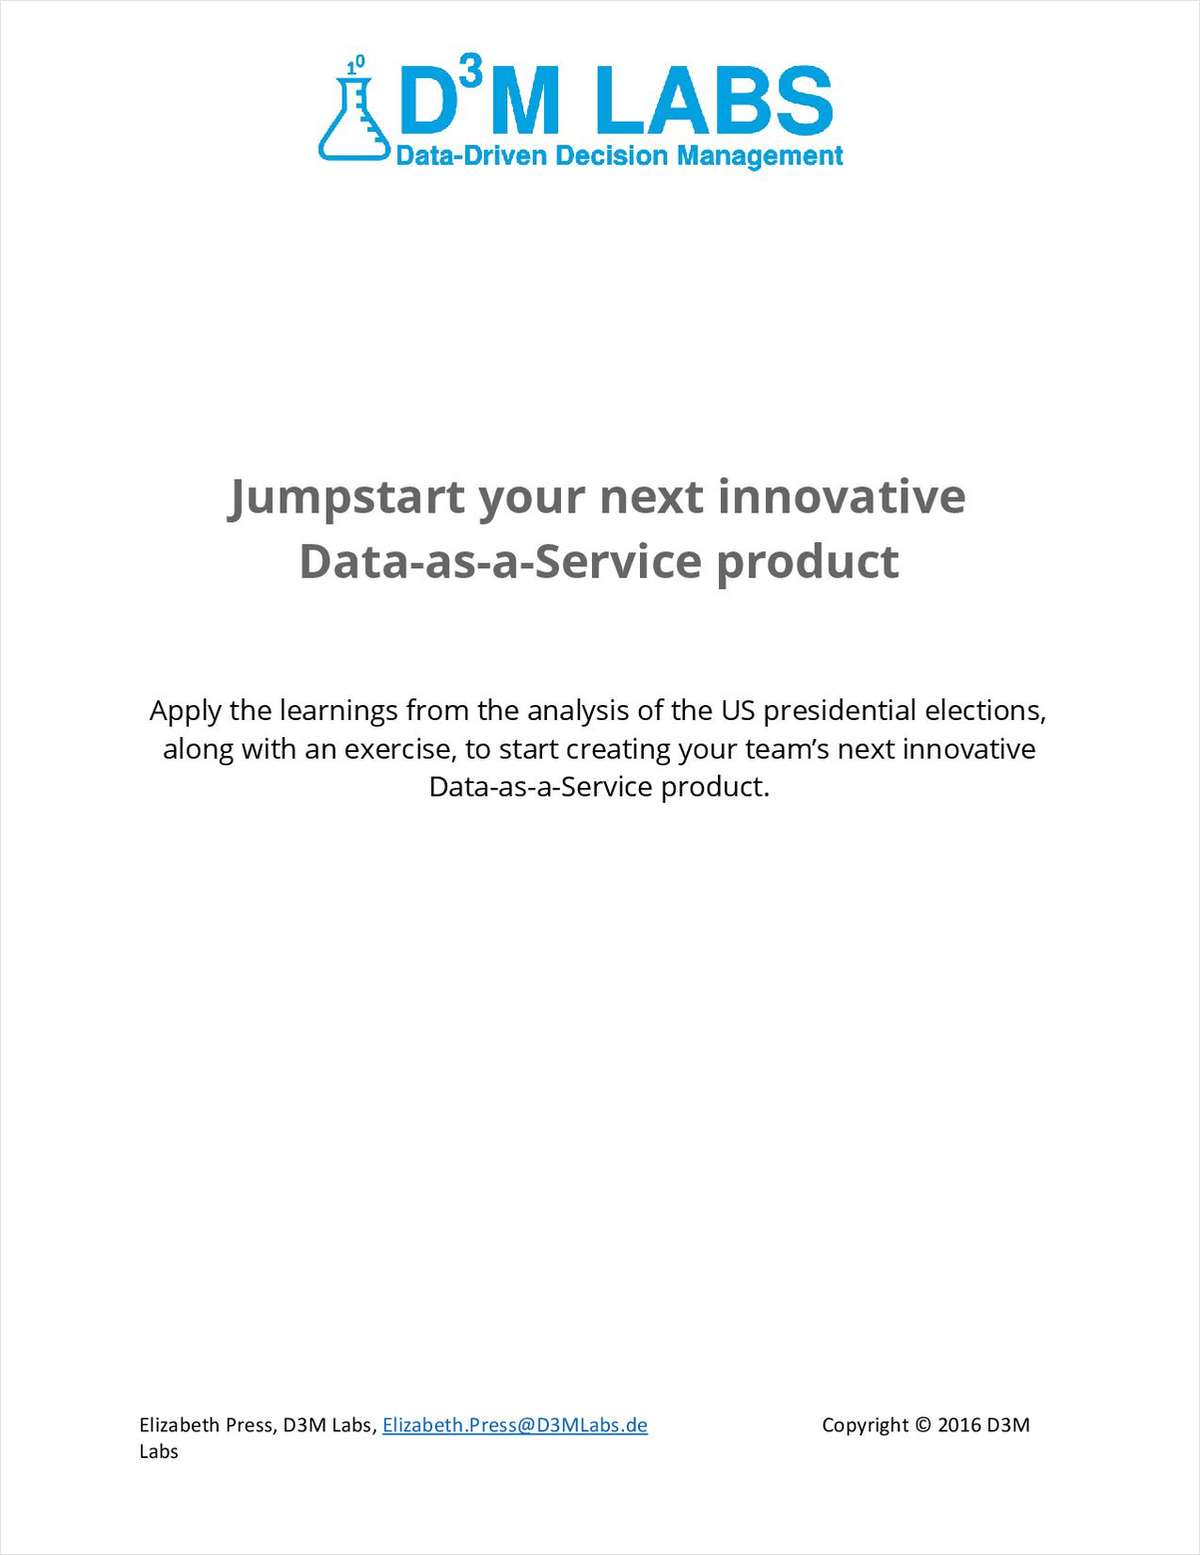 D3M Labs Data-as-a-Service Hacks For Creating A Successful Data Product